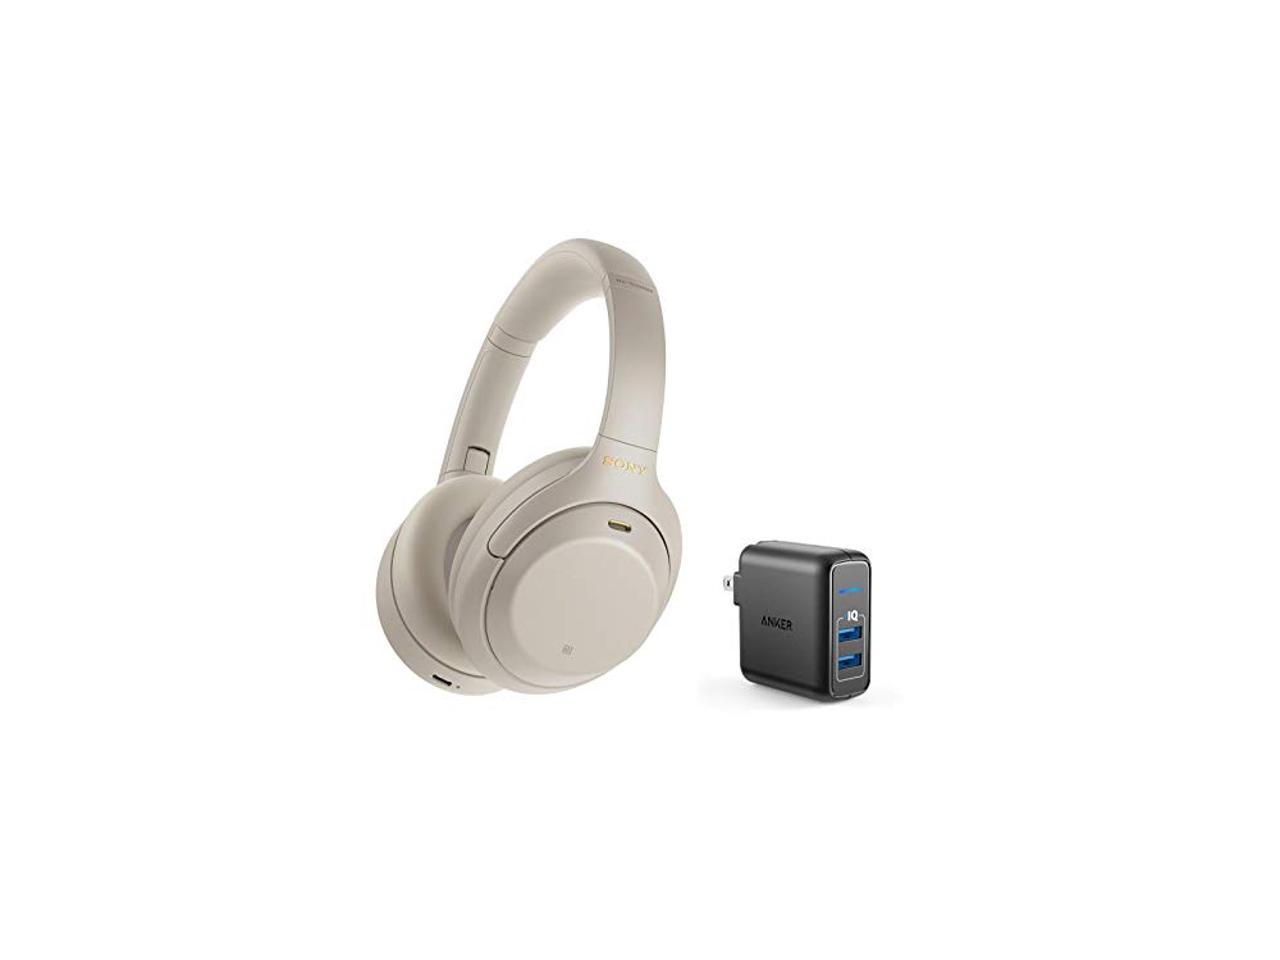 Sony WH-1000XM4 Wireless Noise-Canceling Headphones Bundle with 